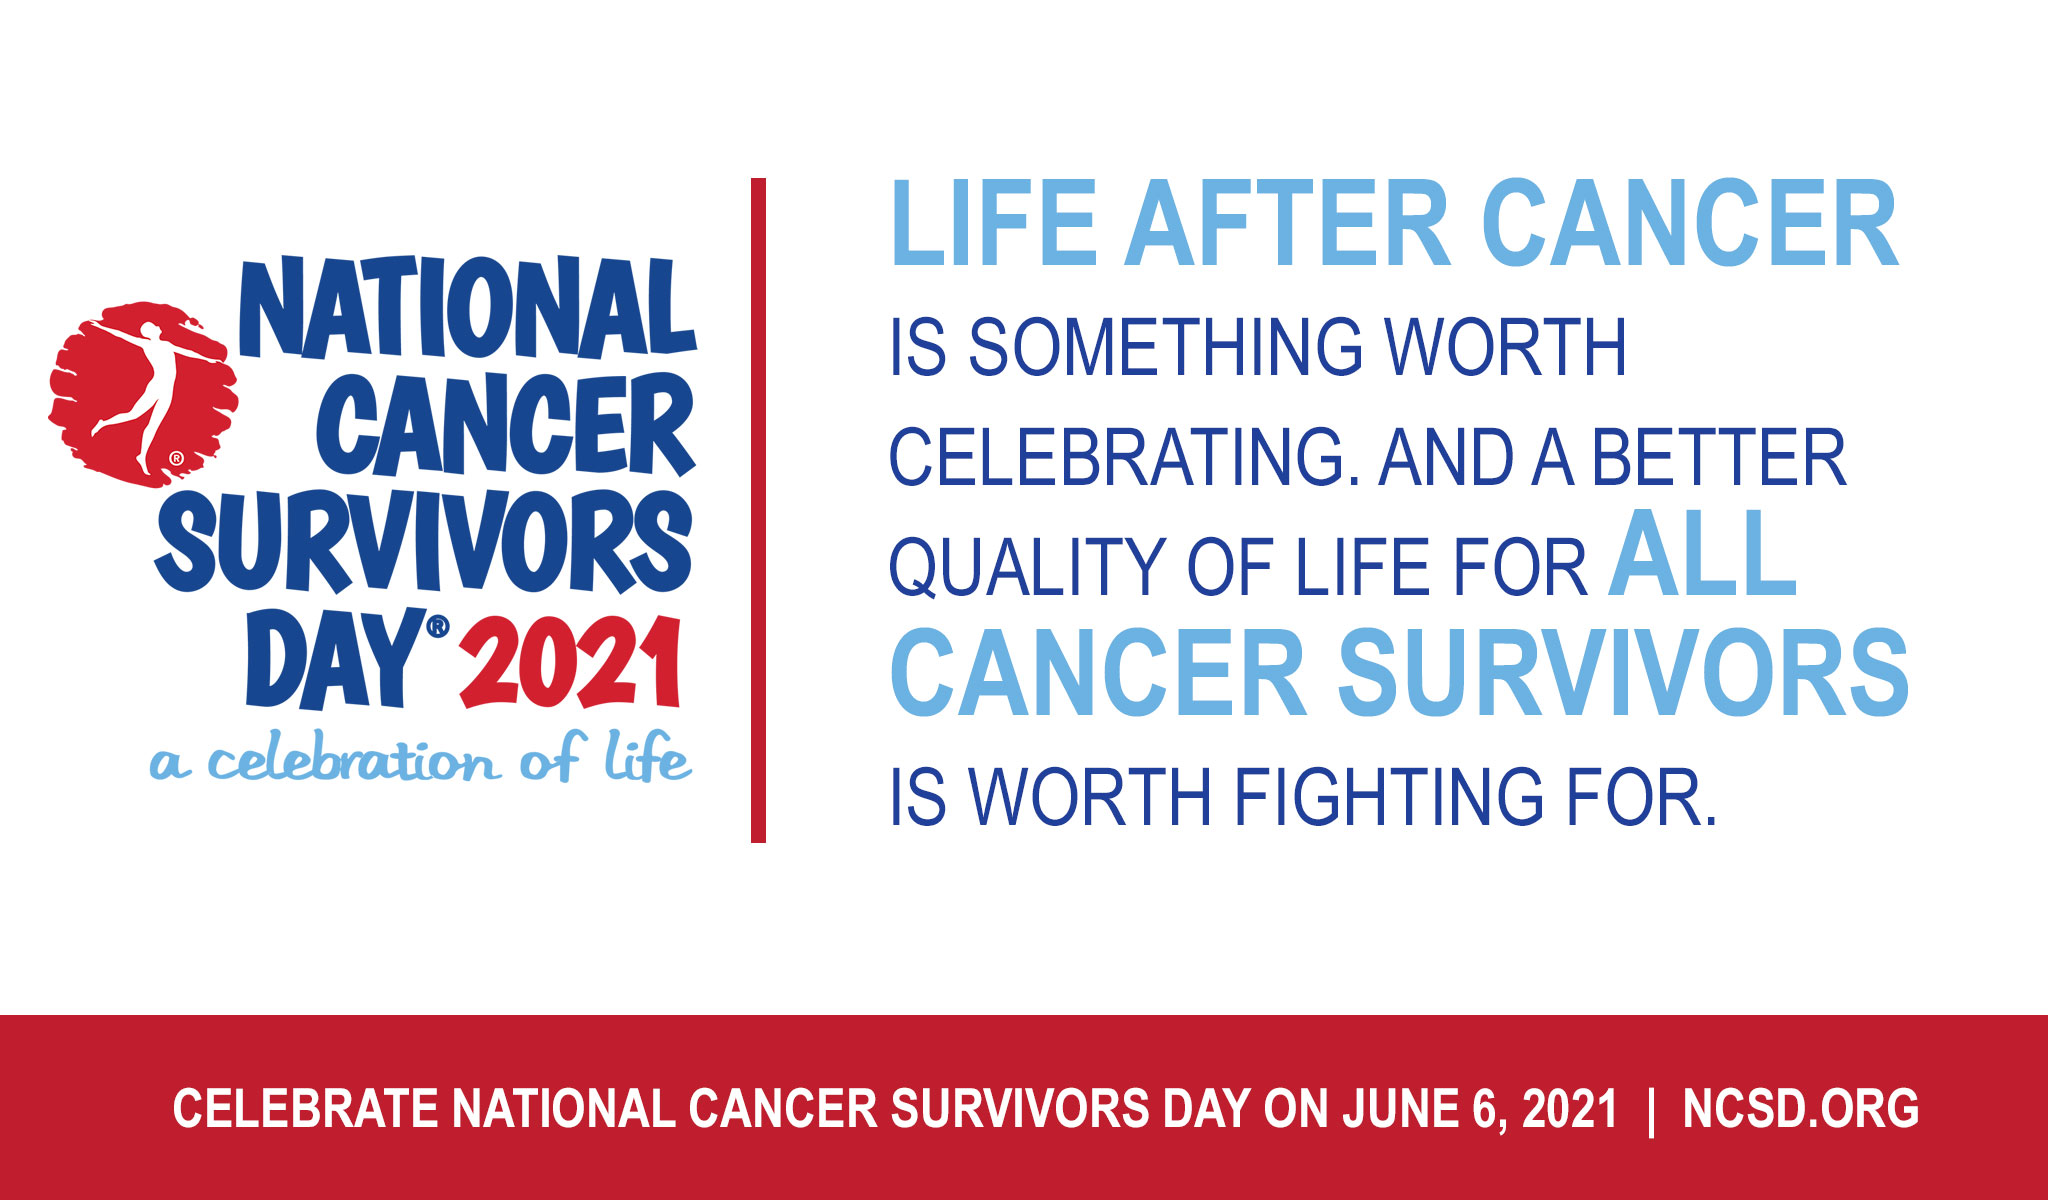 National Cancer Survivors Day® is a CELEBRATION for those who have survived, an INSPIRATION for those recently diagnosed, a gathering of SUPPORT for families, and an OUTREACH to the community.